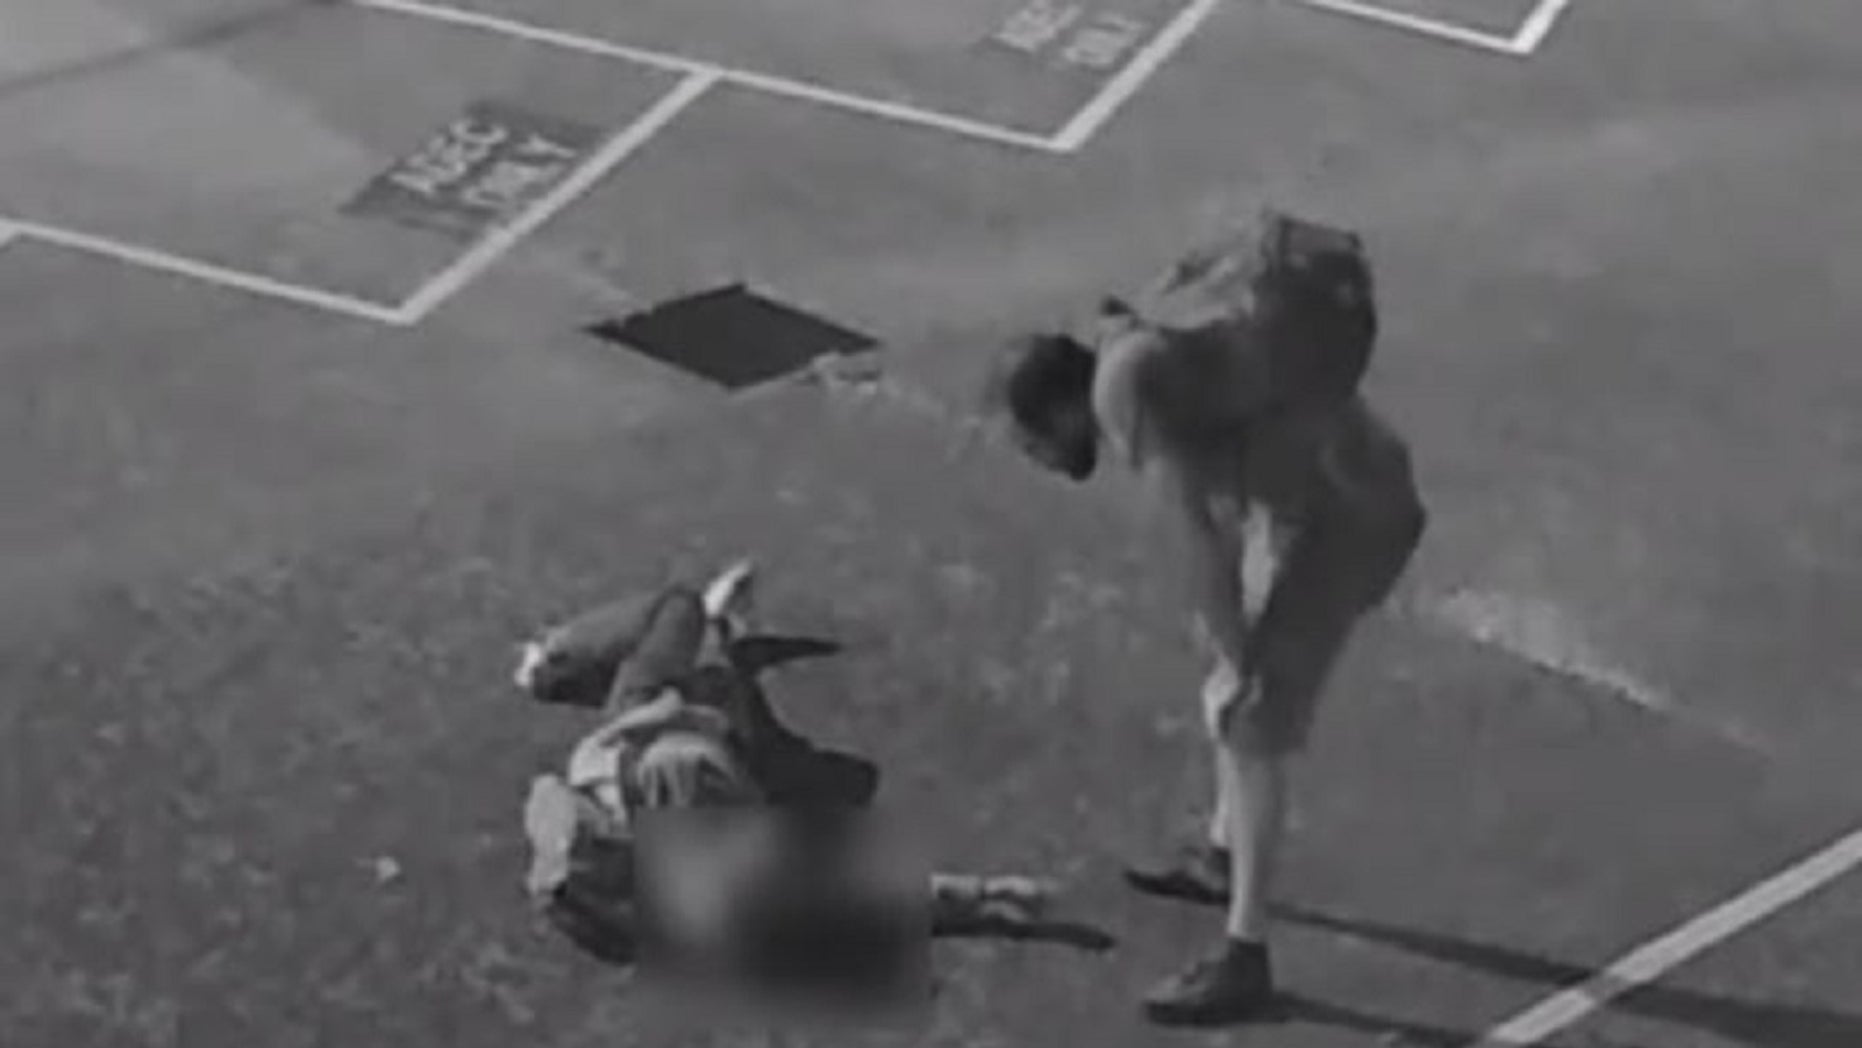 A screen capture from surveillance video shows a suspect standing over an unidentified American tourist who was badly beaten in Australia, according to police.